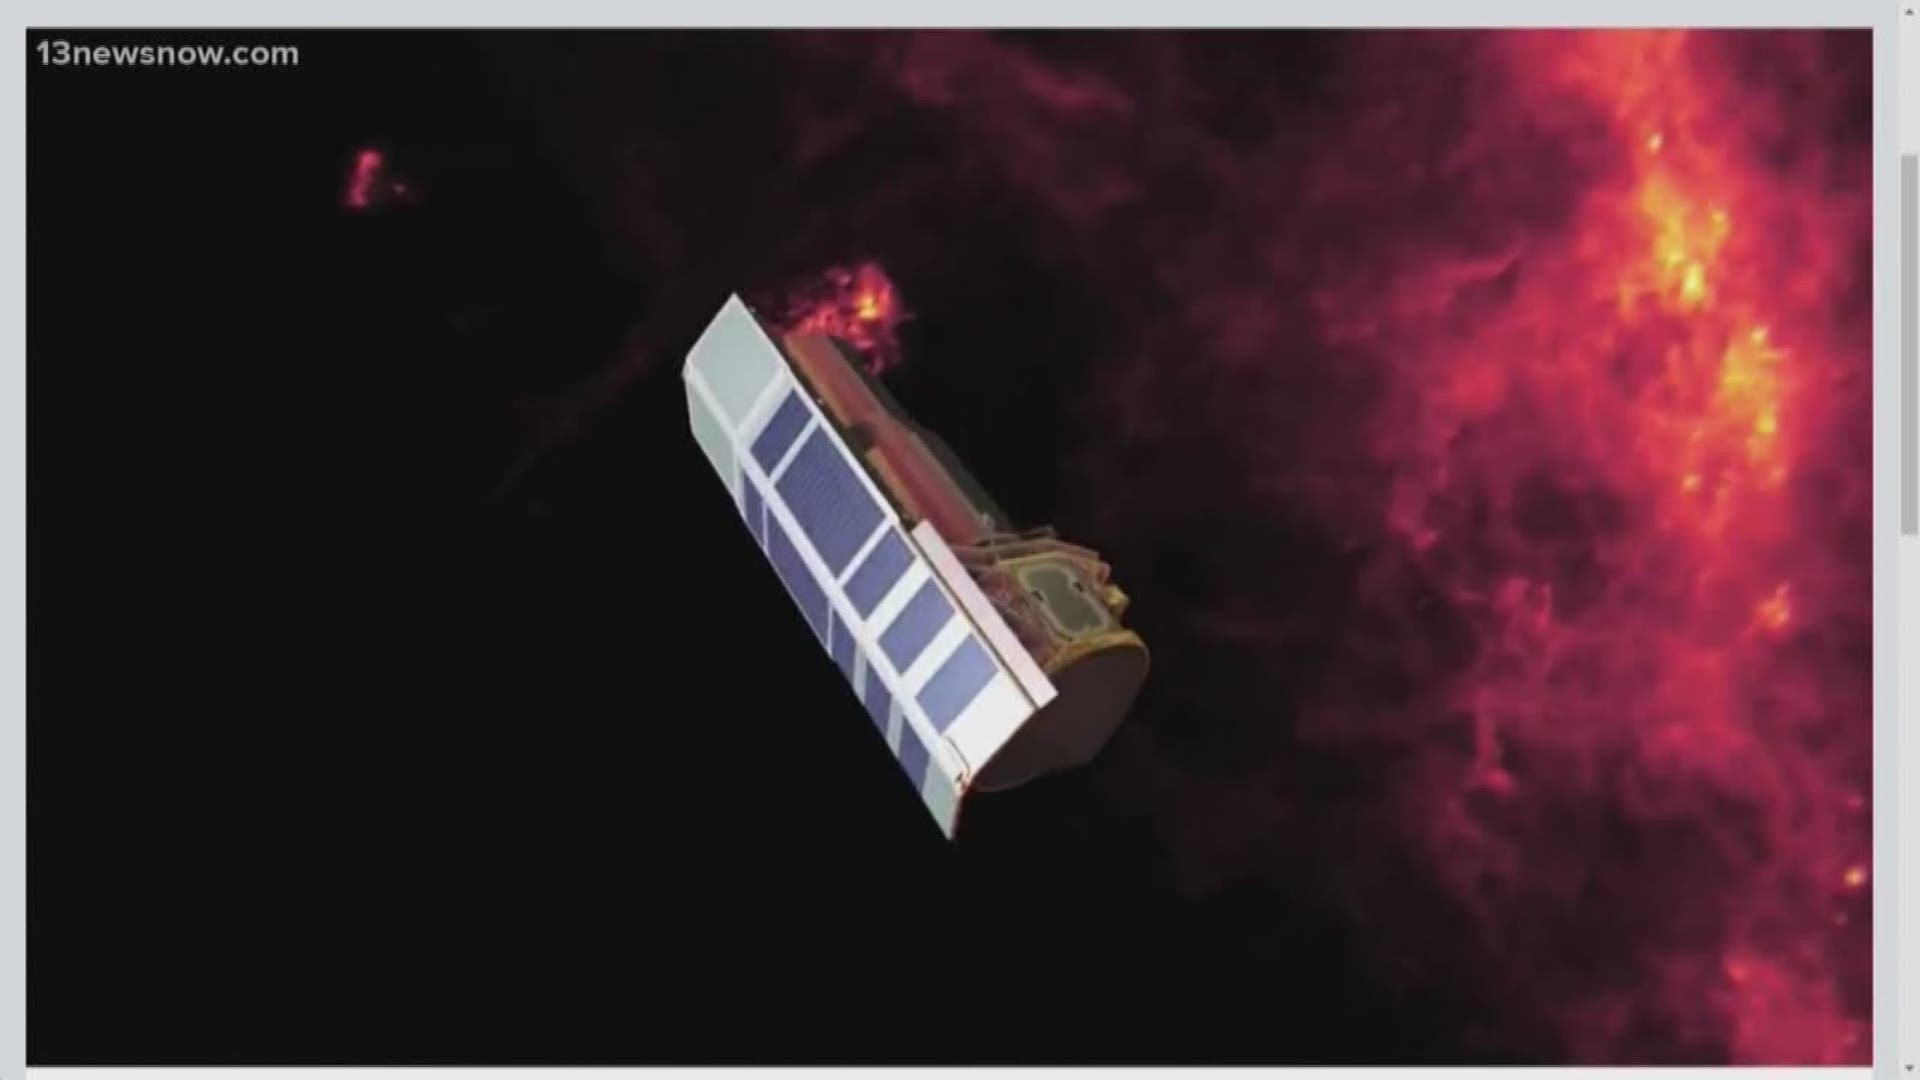 NASA is saying goodbye to its Spitzer Space Telescope after 16 years.